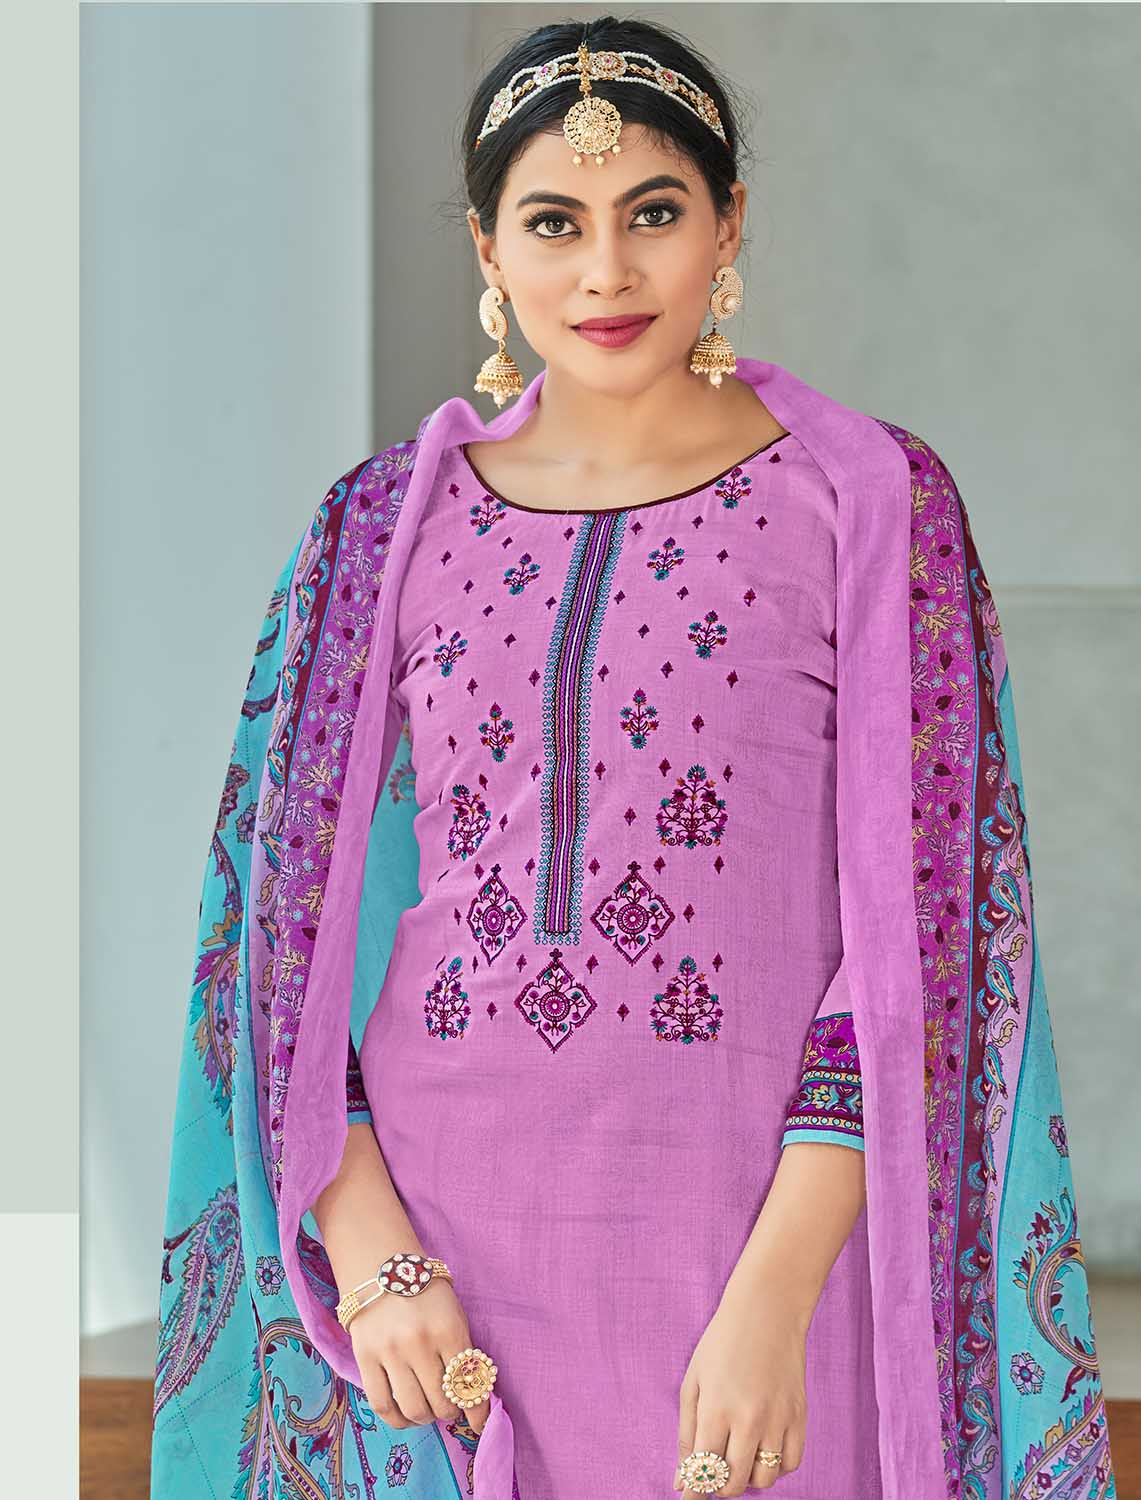 Unstitched Pure Cotton Women Purple Suit Material with Embroidery